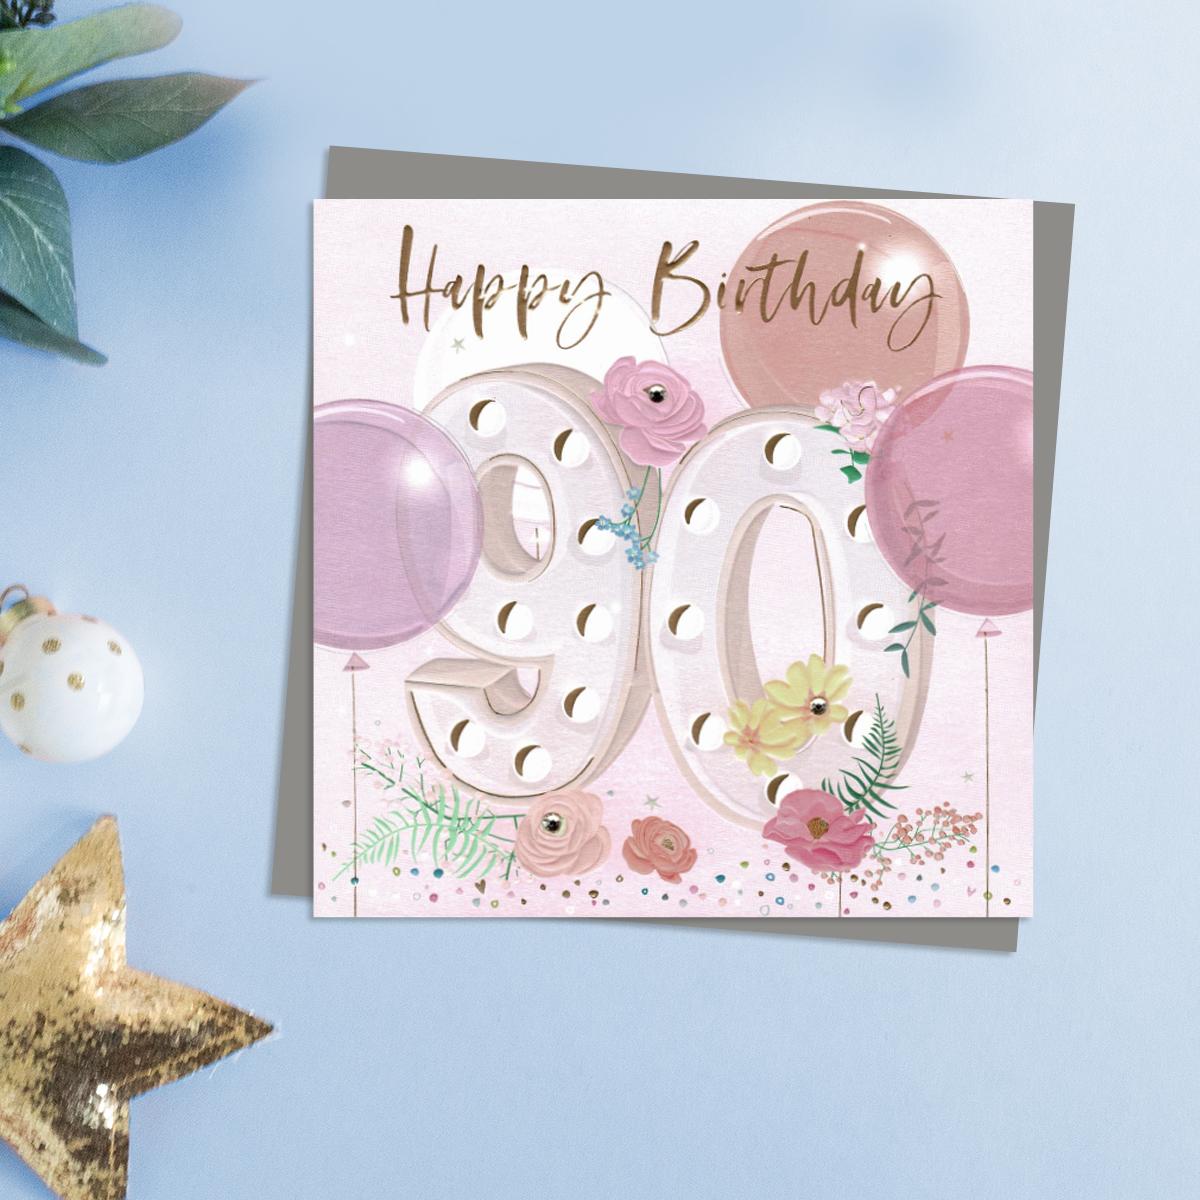 Happy 90th Birthday Flowers And Balloons Design With Embellishments. This Stunning Card Is Completed With Gold Foil lettering And A Co-Ordinating Grey EnvelopeWith